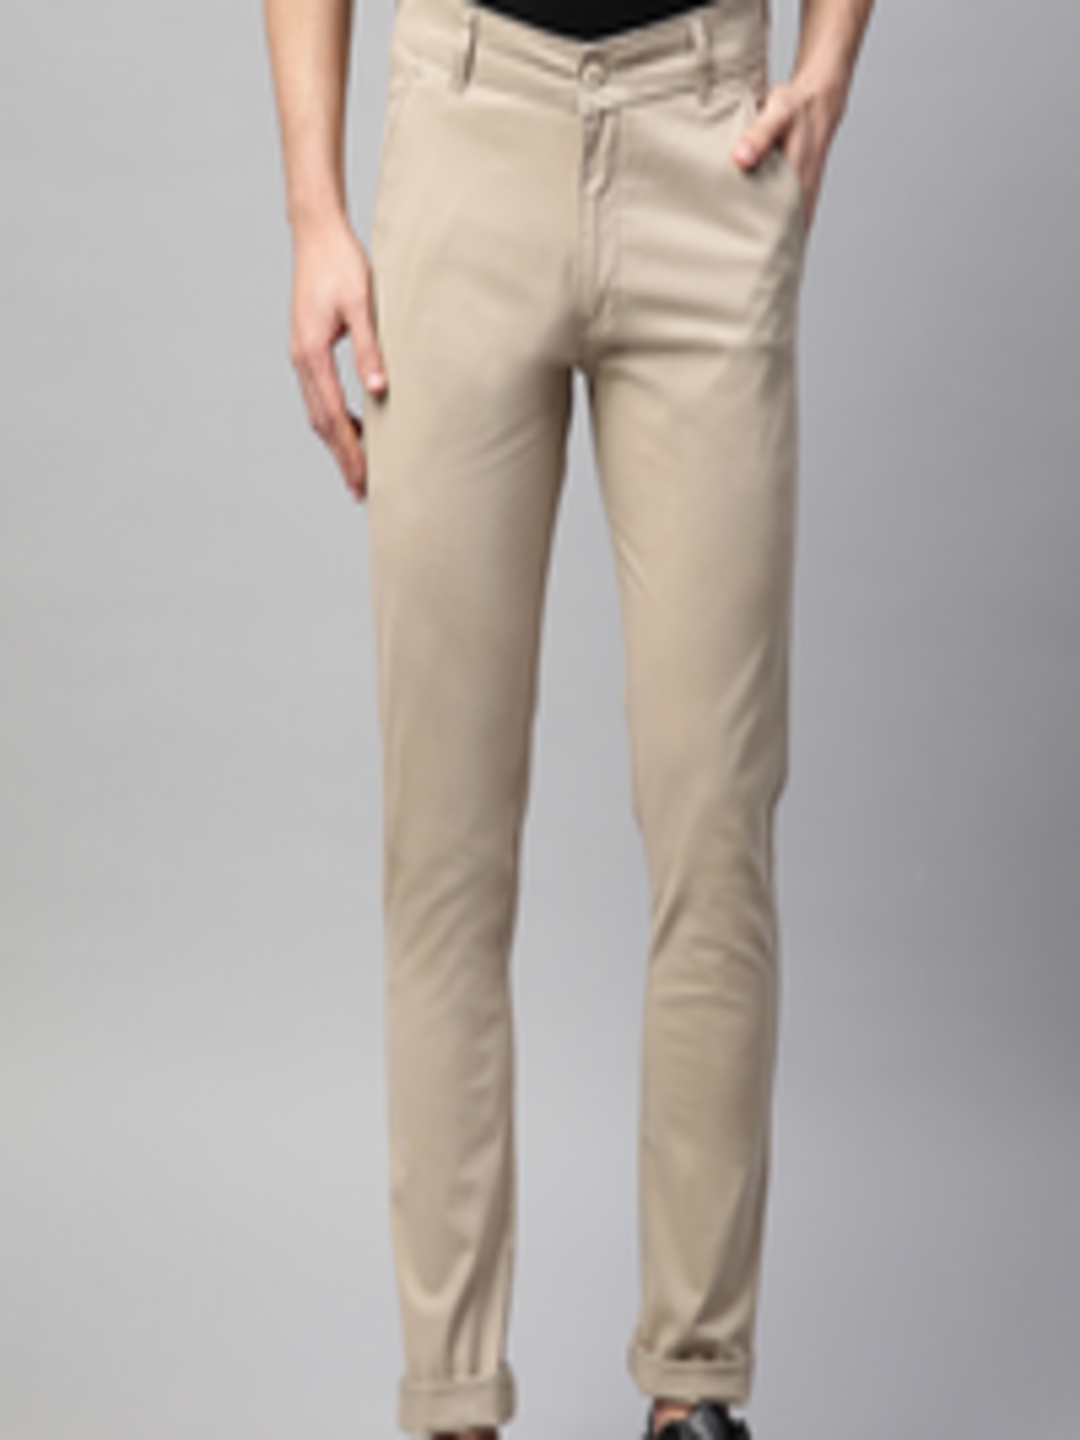 Buy ManQ CASUAL Men Beige Slim Fit Solid Combed Cotton Chinos ...